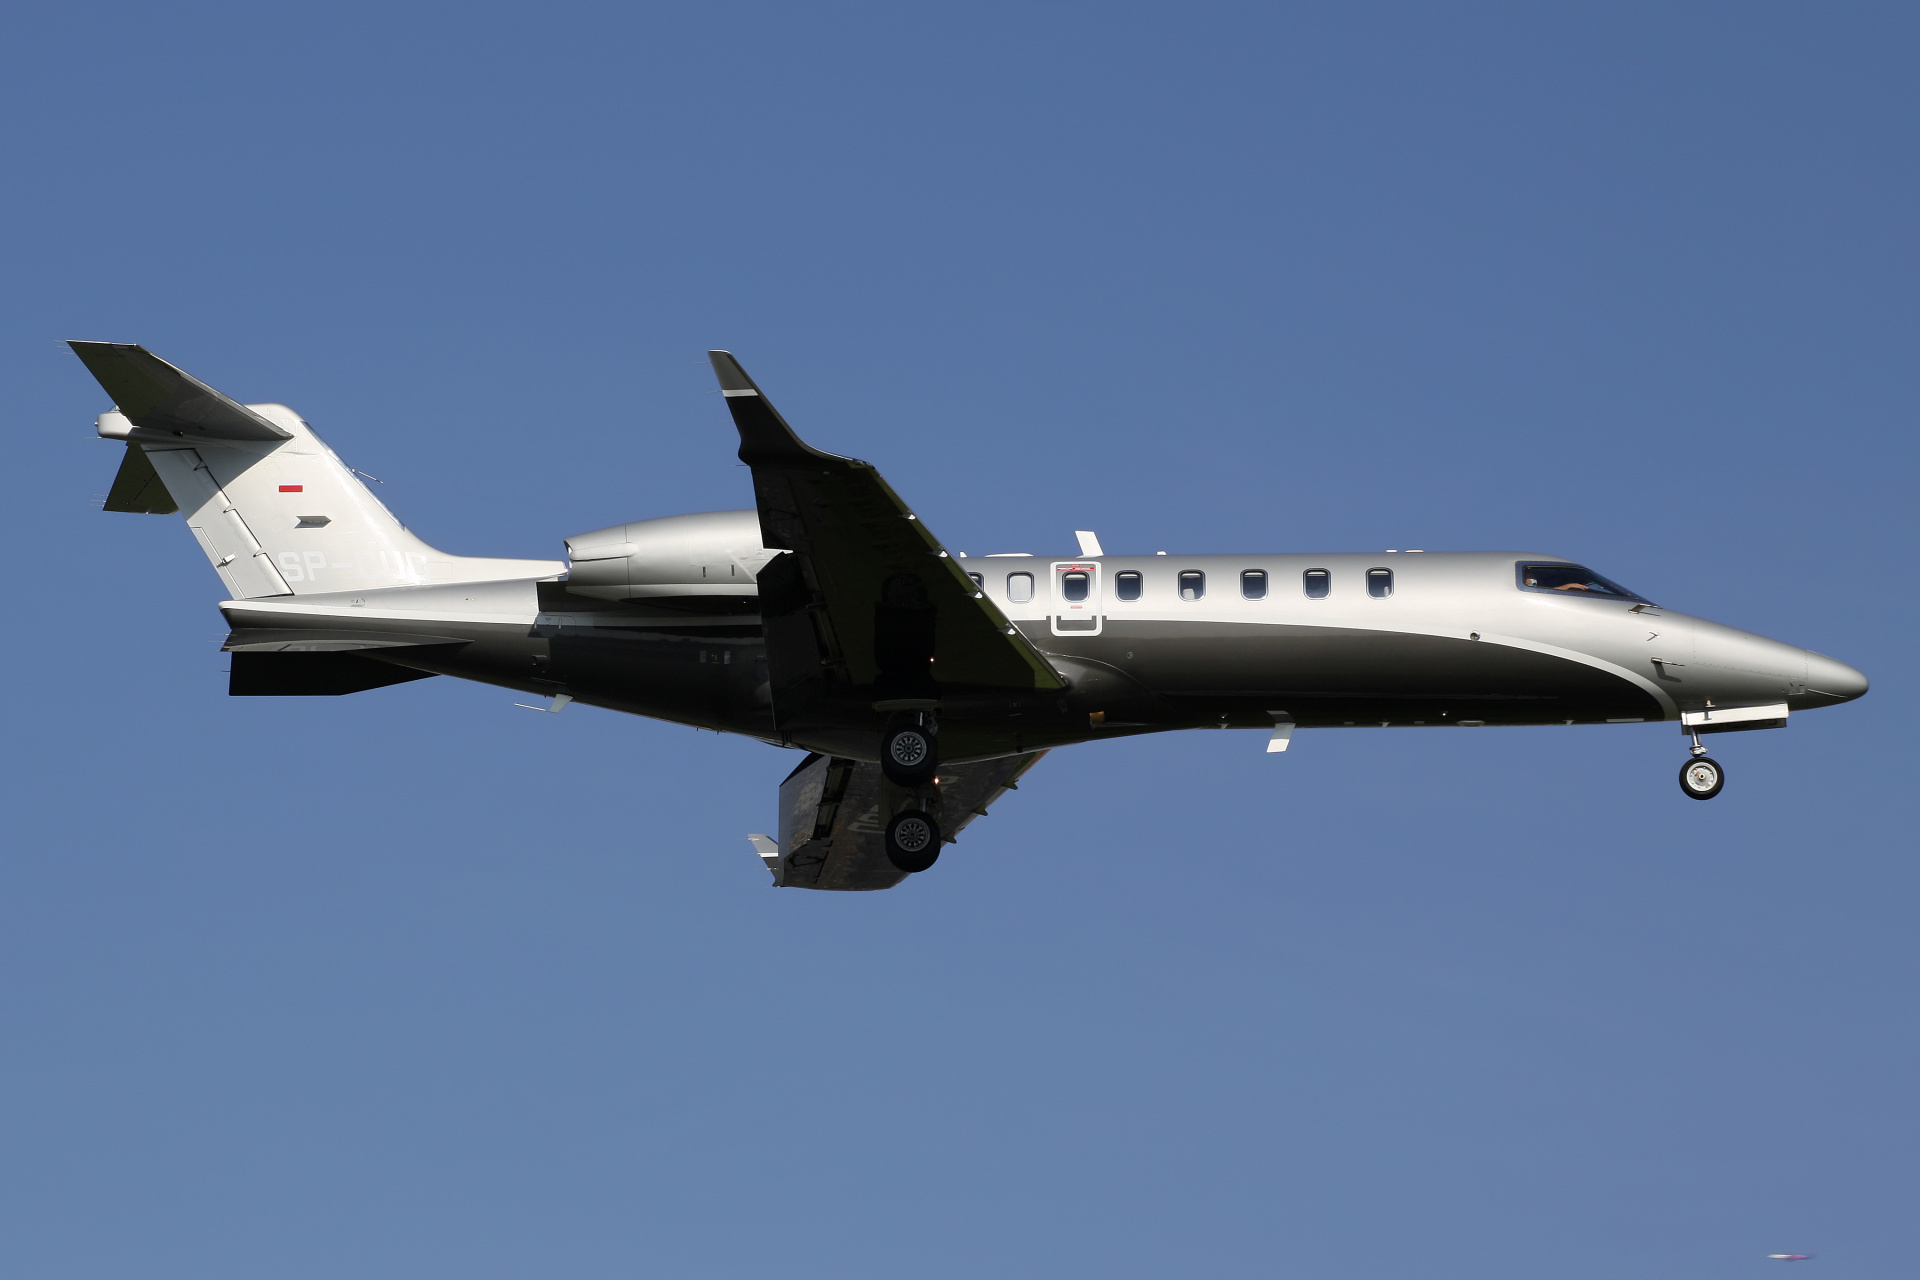 SP-CUD, private (Aircraft » EPWA Spotting » Bombardier Learjet 75 Liberty)